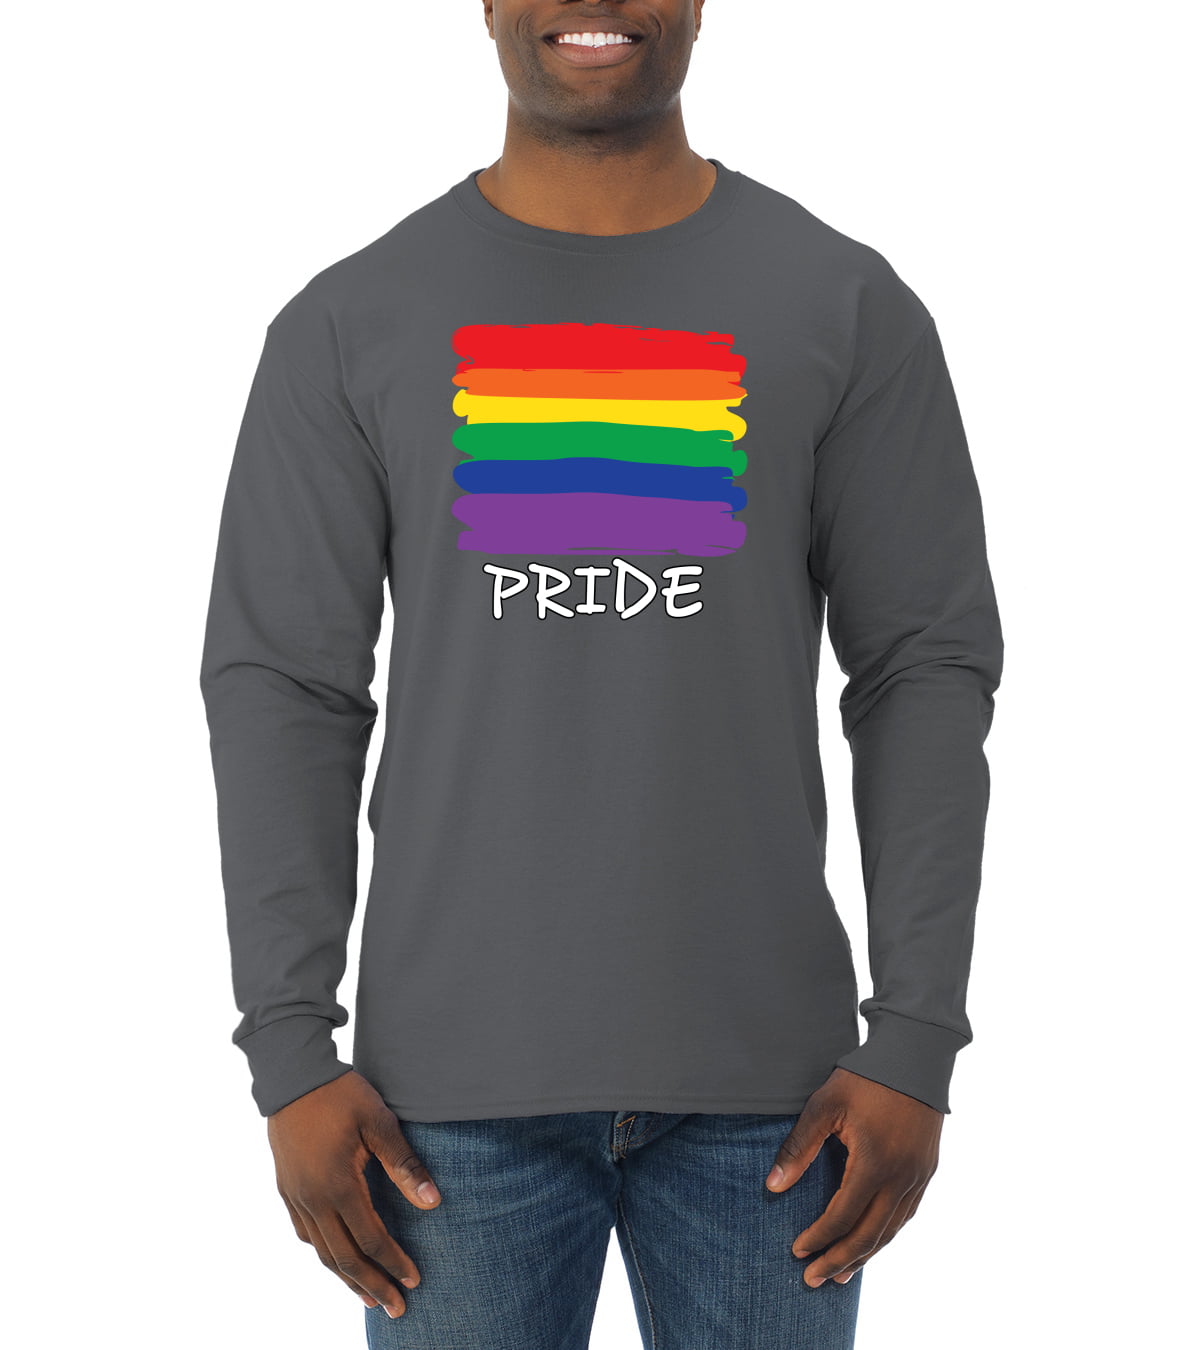 t shirts colors of gay pride flag